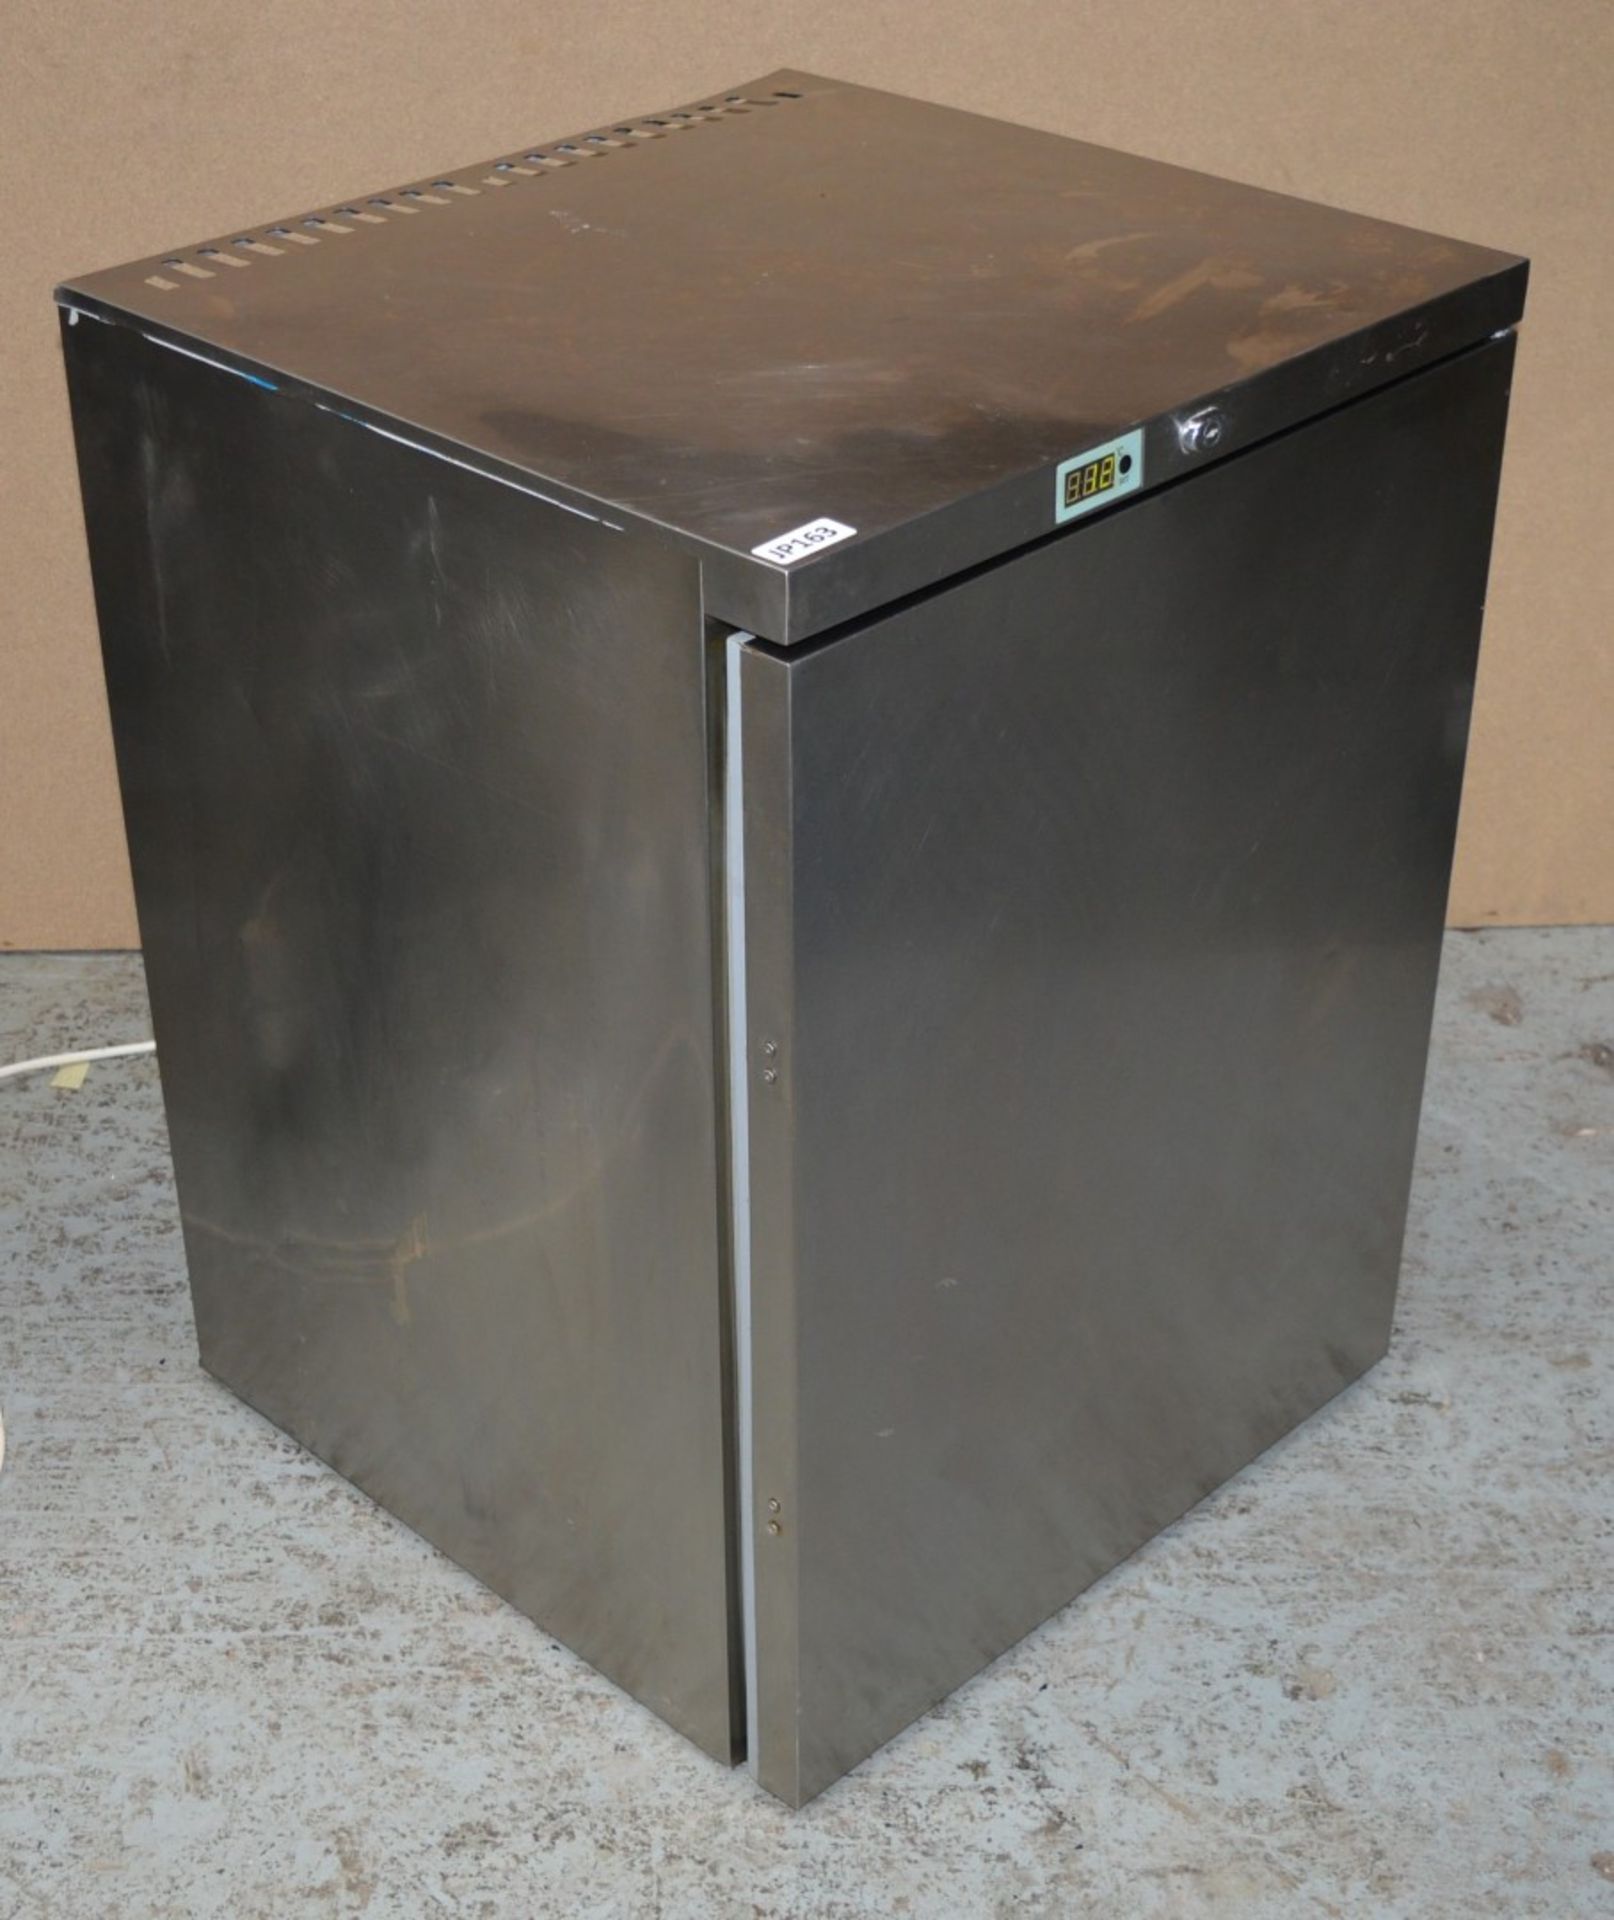 1 x Blizzard Undercounter Freezer - Model UFC140 - Stainless Steel Finish - Suitable For - Image 5 of 7